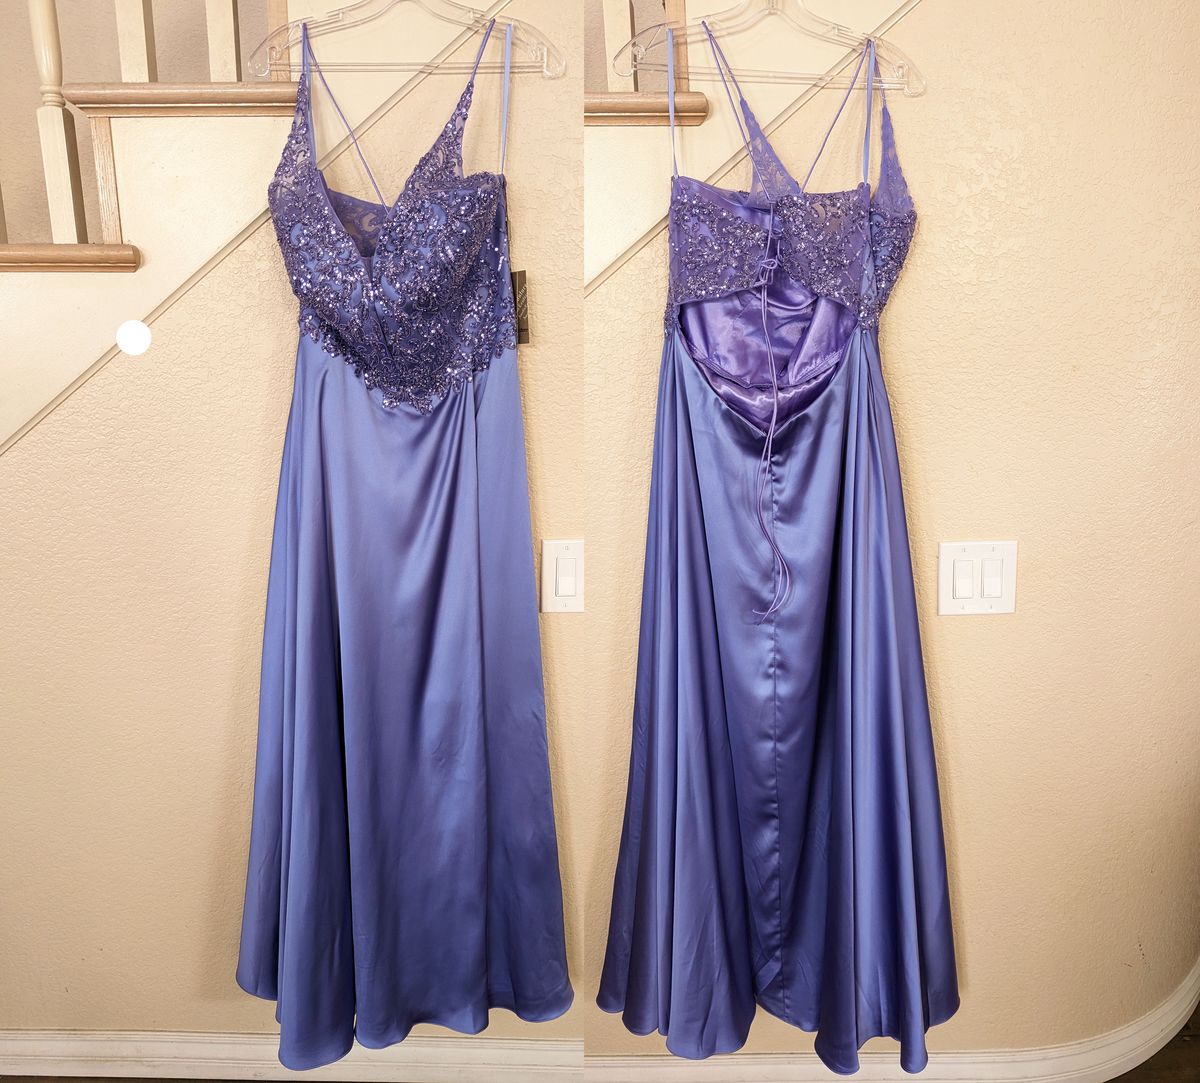 Style Periwinkle Sequined Floral Sleeveless A-line Satin A-line Gown Plus Size 16 Wedding Guest Sequined Purple Ball Gown on Queenly